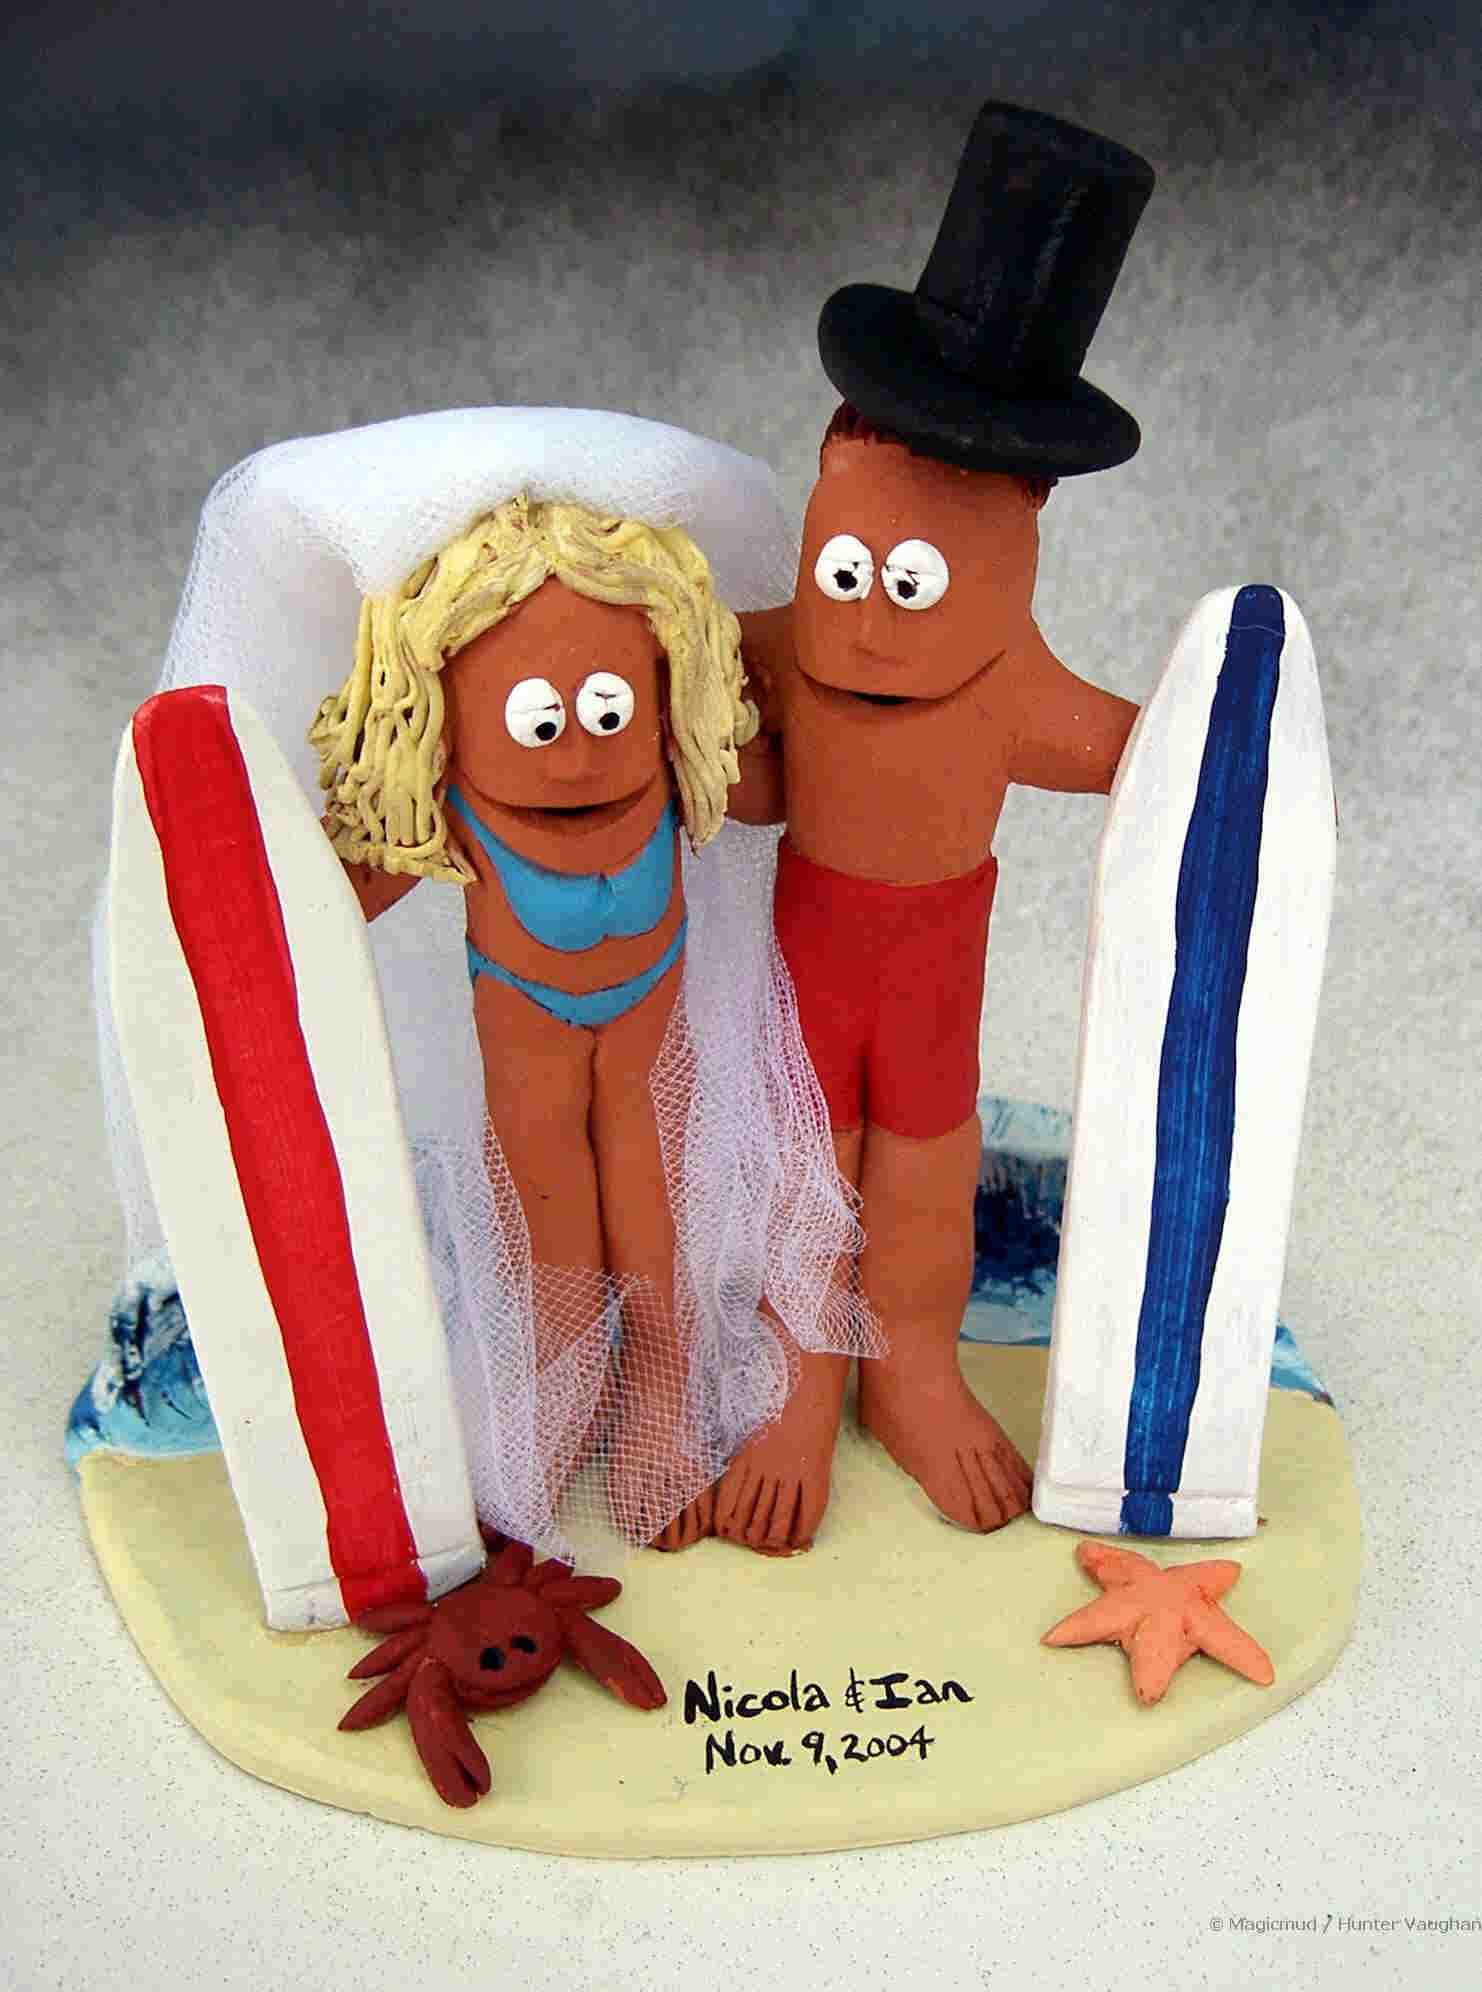 Kick up some sand with a unique cake topper!